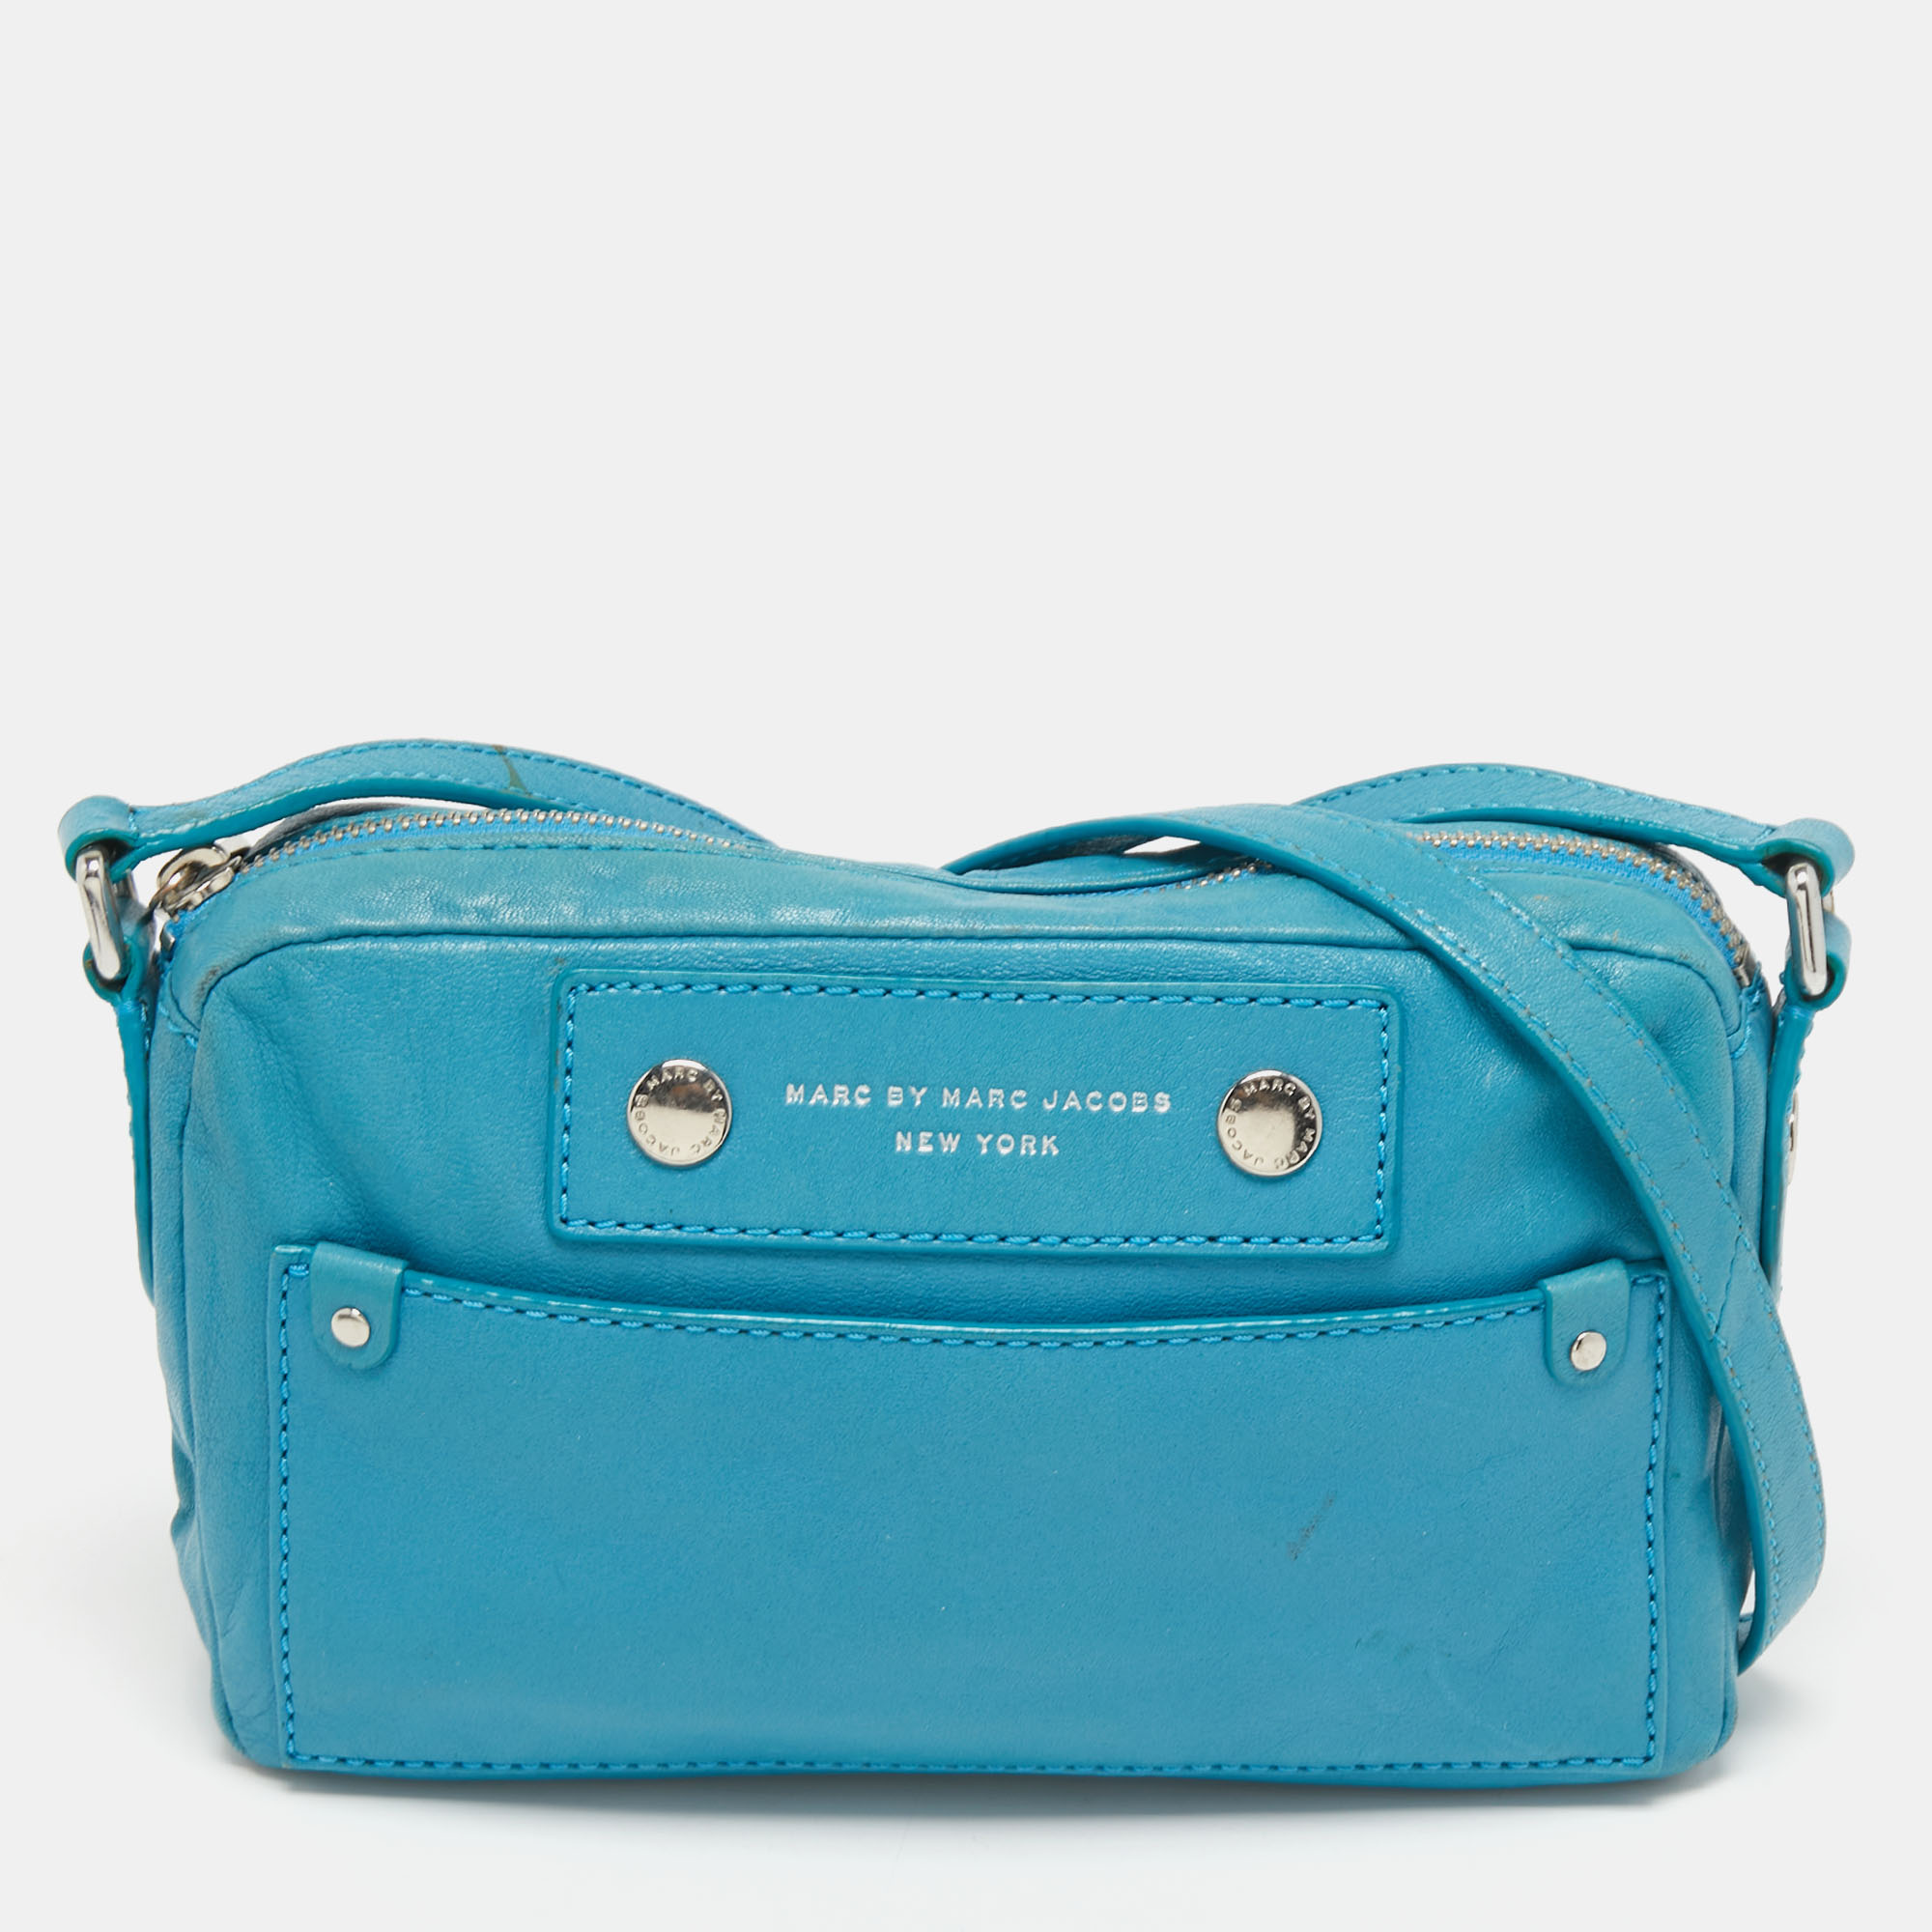 Pre-owned Marc By Marc Jacobs Turquoise Blue Leather Crossbody Bag